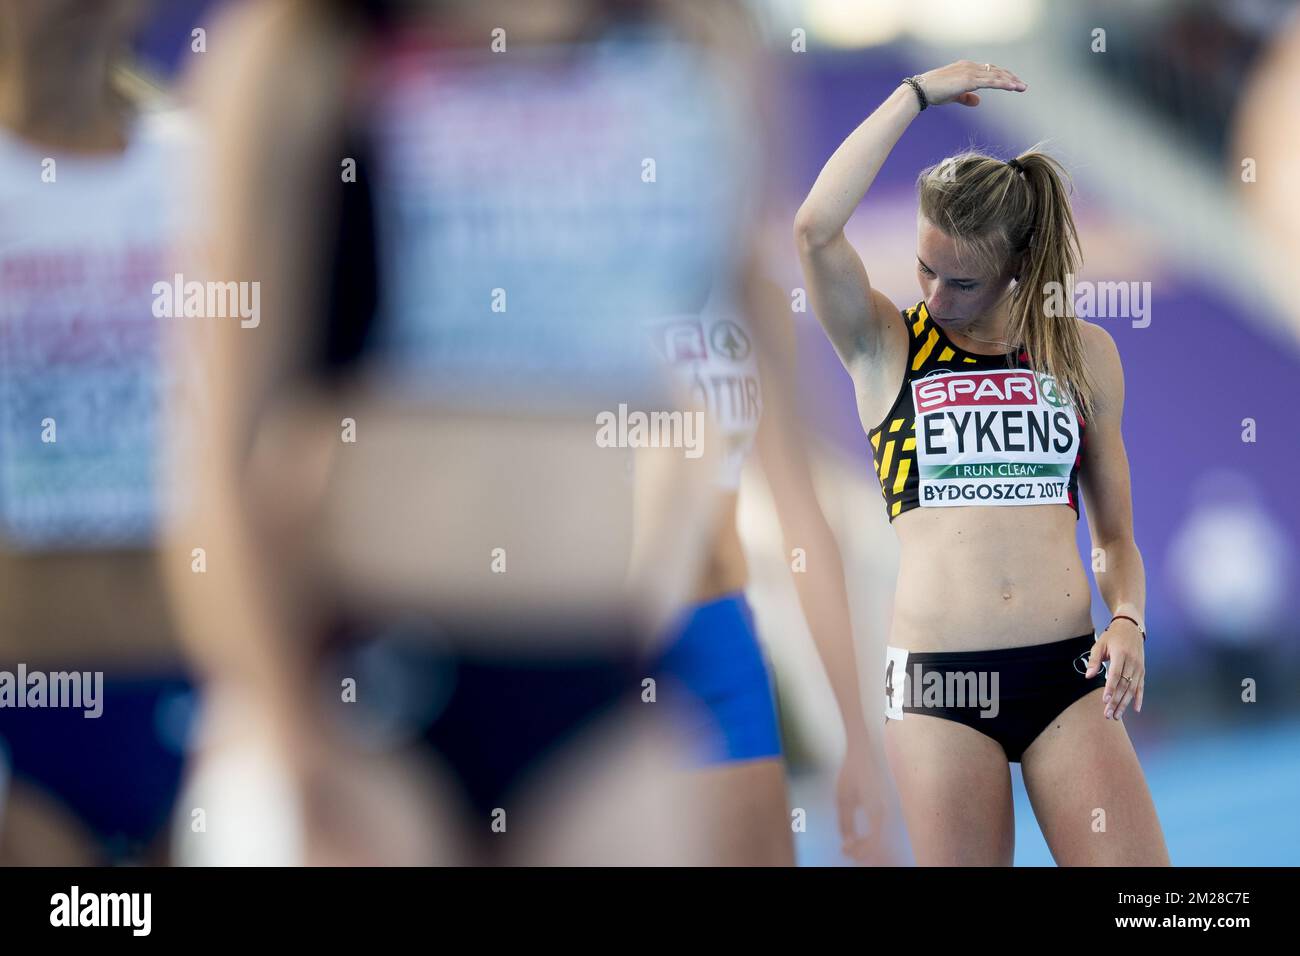 Belgian Renee Eykens (R) pictured at the women's 800m race on the third day of the Under 23 European Championships Athletics, in Bydgoszcz, Poland, Saturday 15 July 2017. BELGA PHOTO JASPER JACOBS Stock Photo